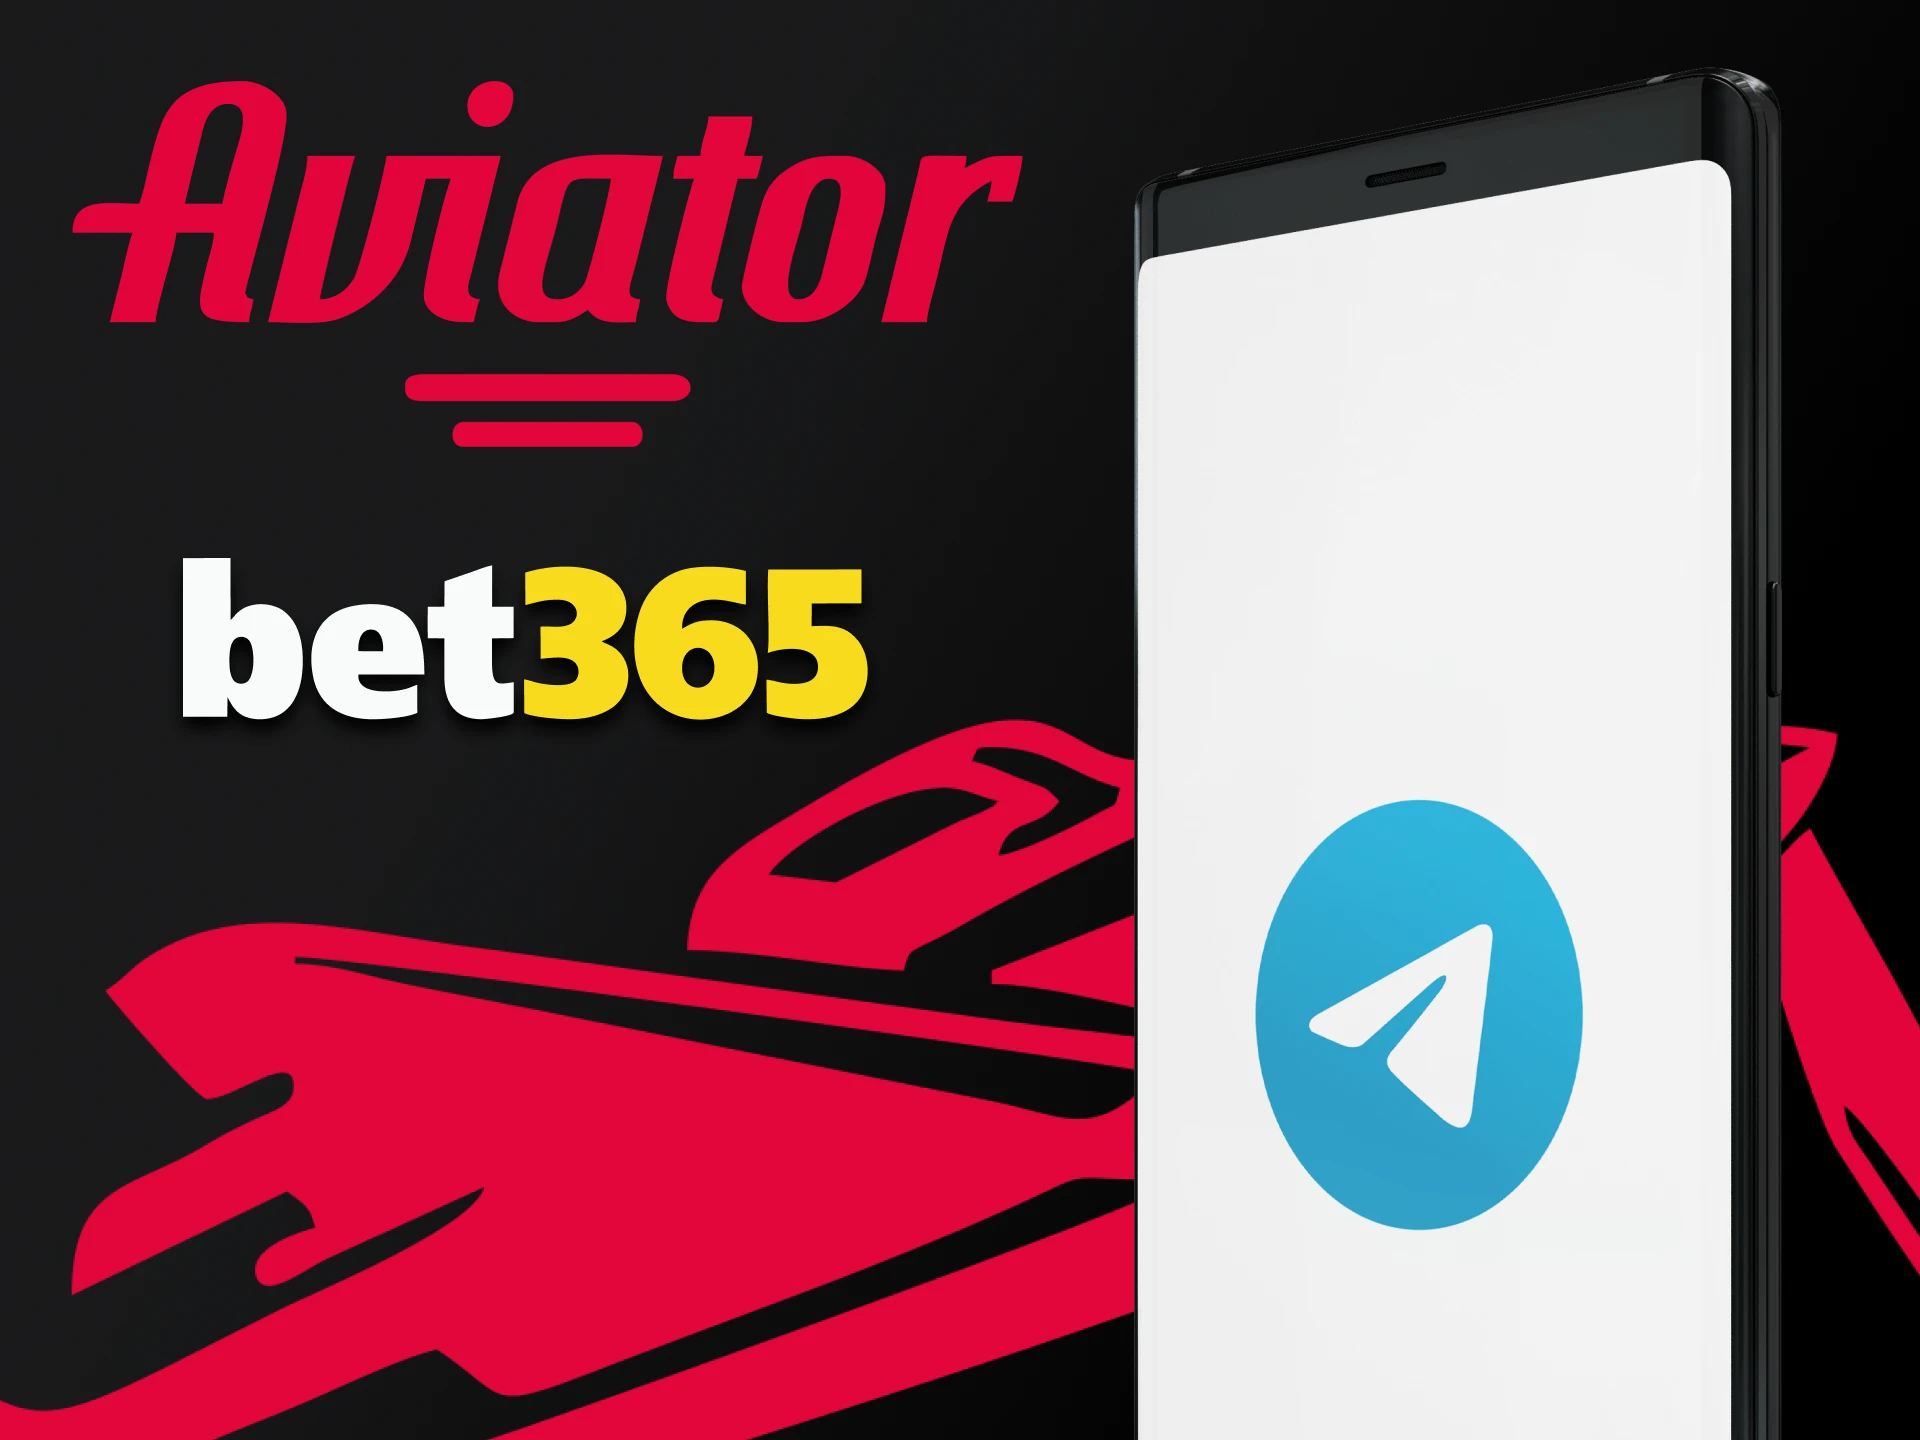 You can use a special signal to play Aviator from Bet365.